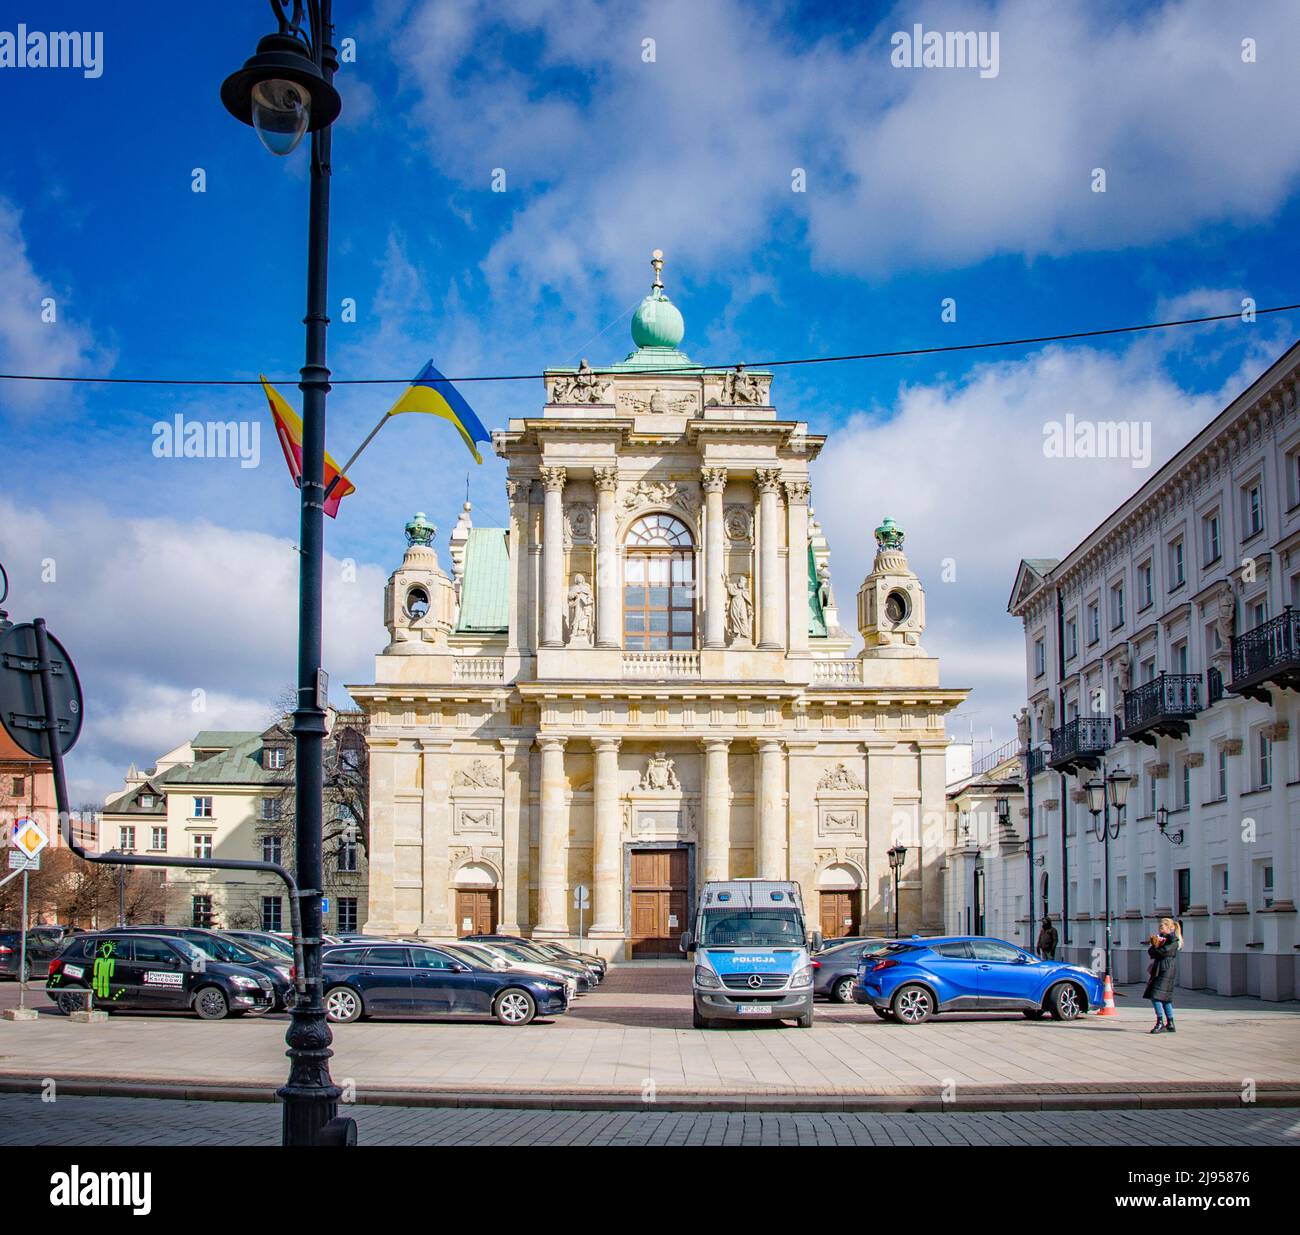 WARSAW, POLAND. MARCH 08. Church of the assumption of the virgin mary and of st joseph. Old city center Stock Photo